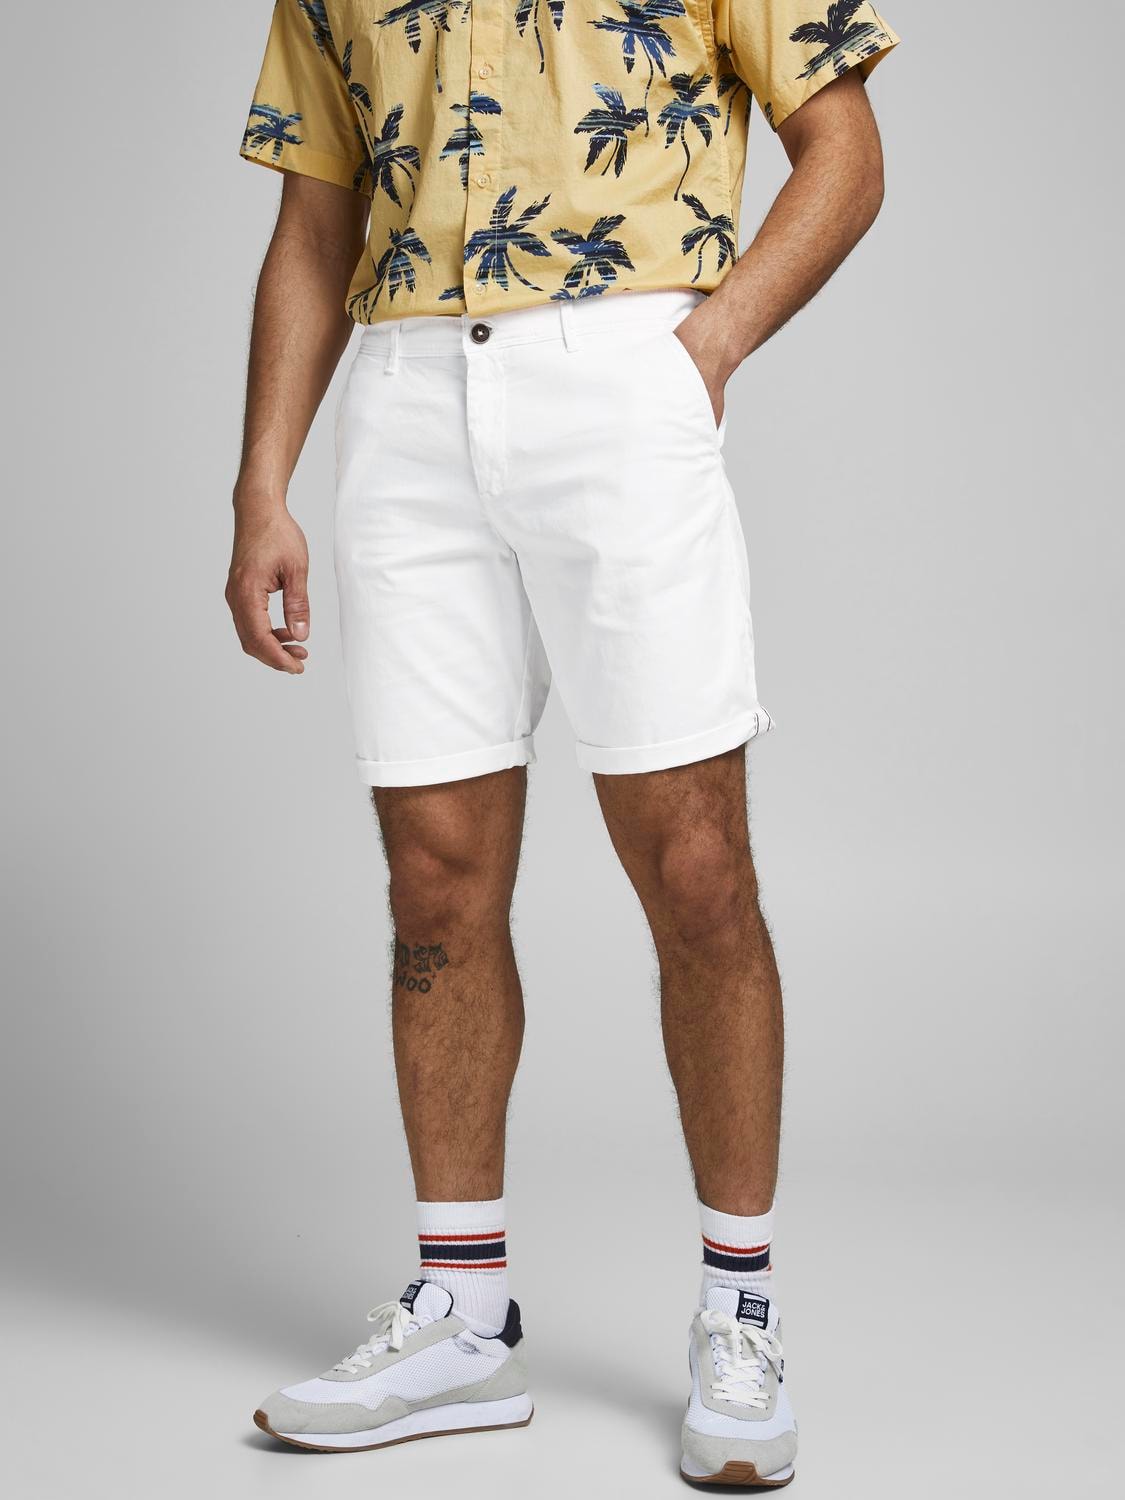 Men's Bowie Shorts Solid-White-Model Fronnt View